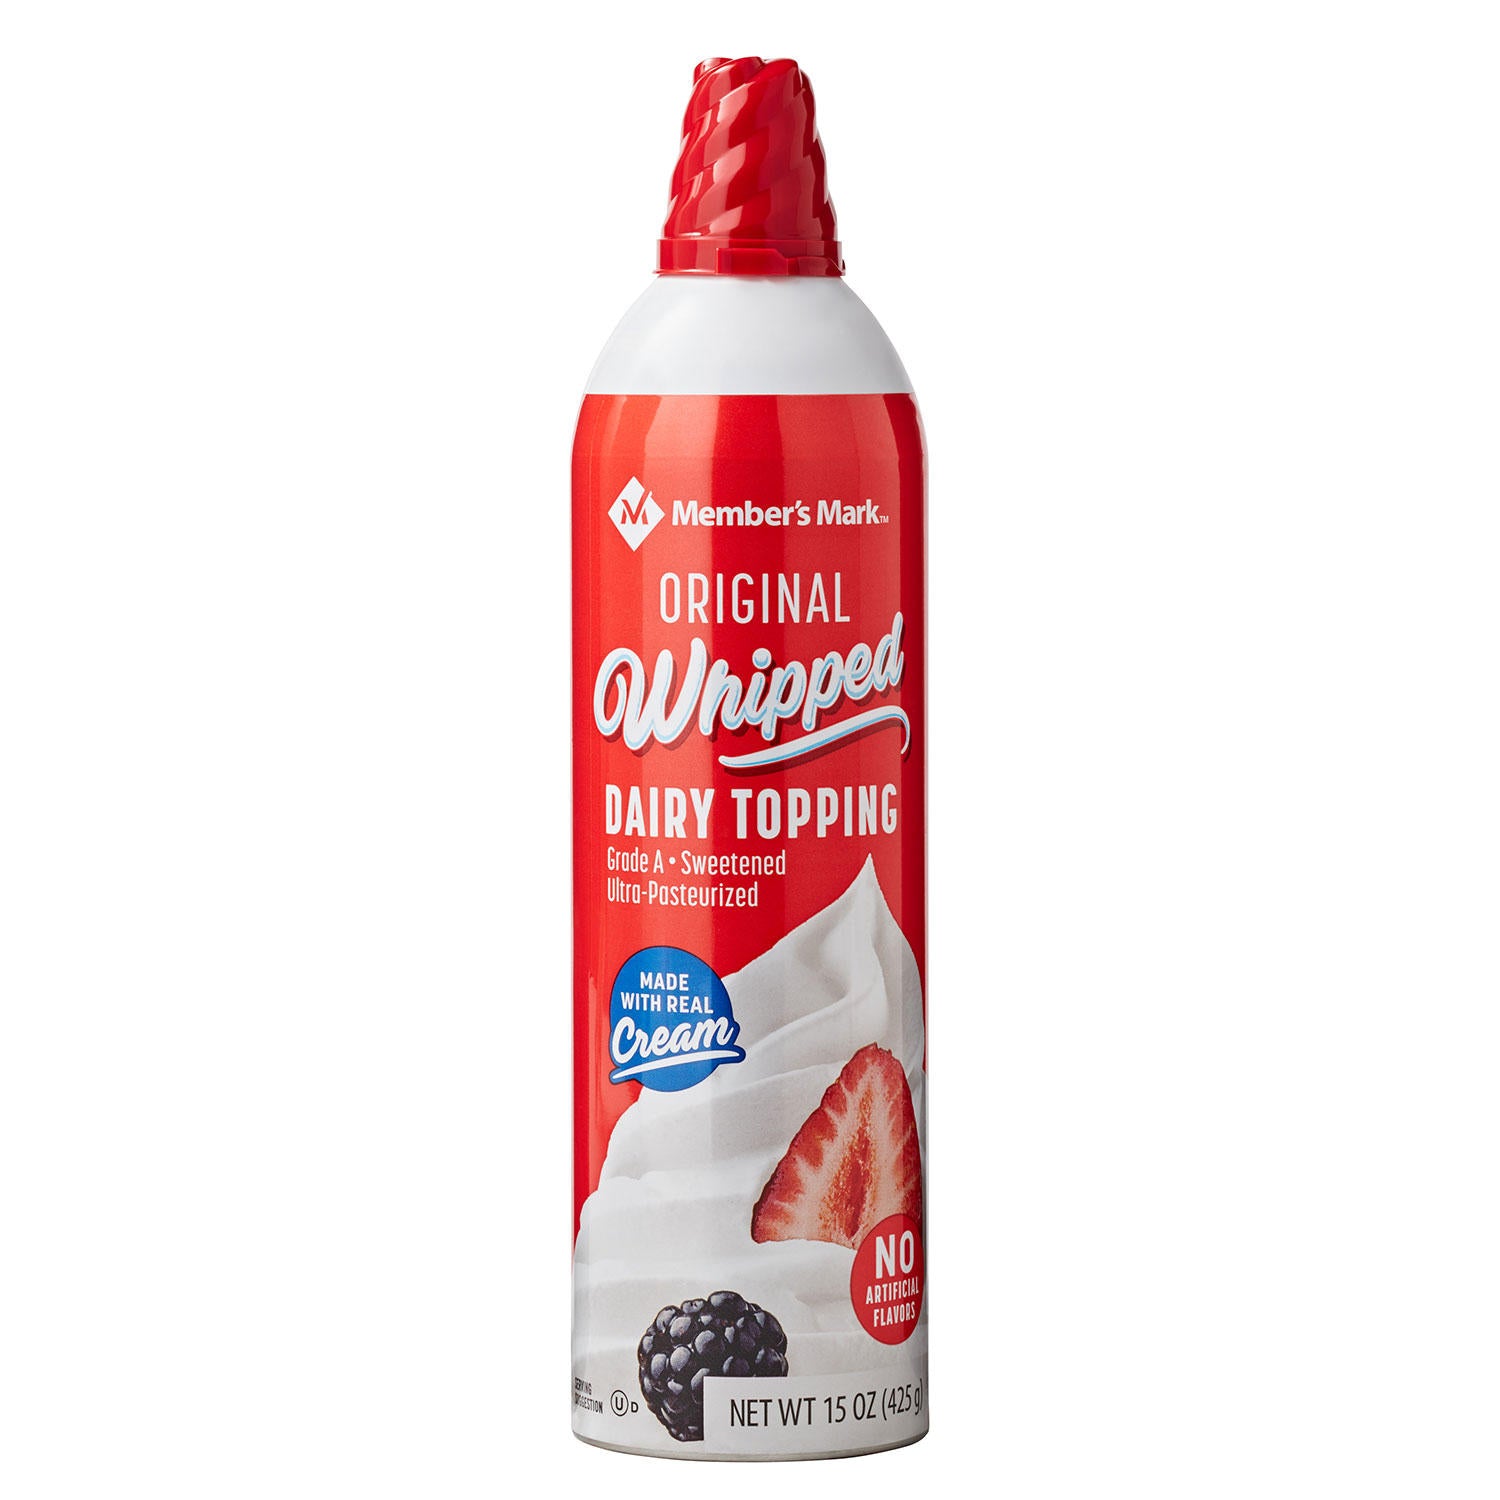 Dairy-free whipped topping, 2018-11-28